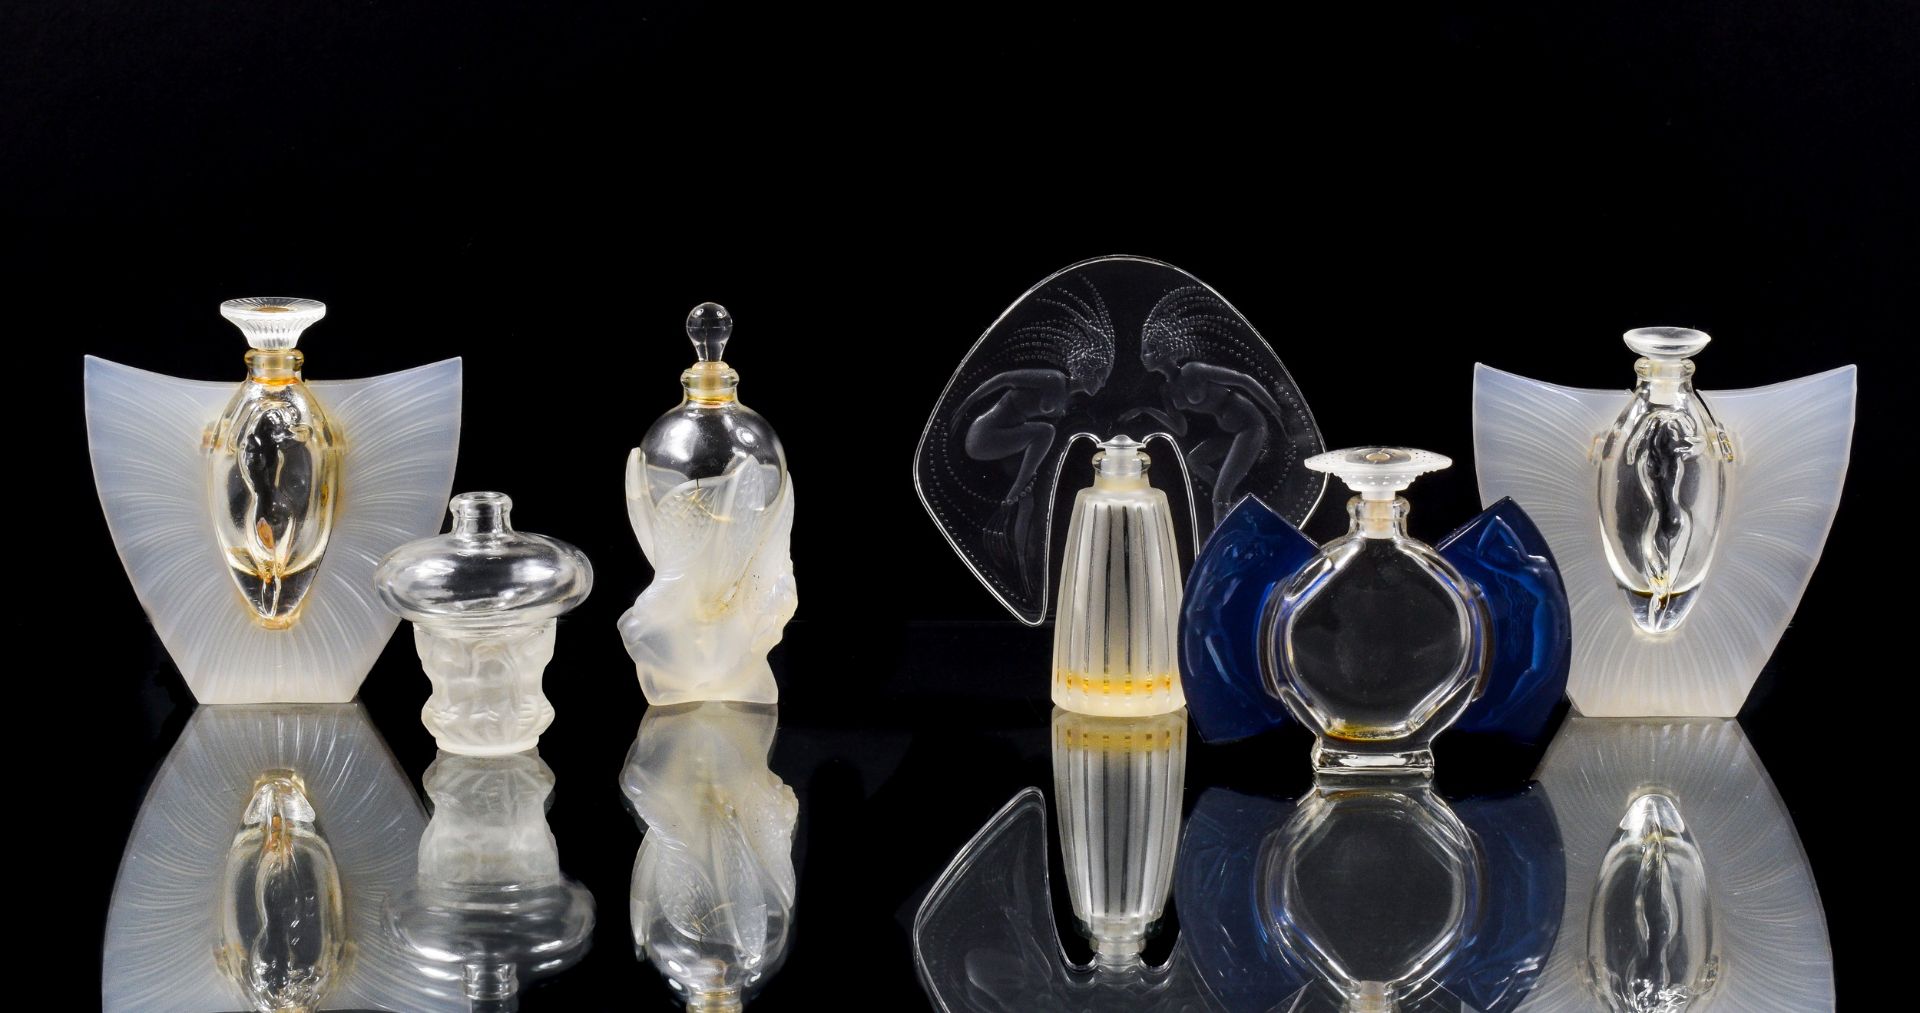 Lalique "Les Flacons Miniatures", perfume bottles, 1998, 1999, 2000 edition, cased with display card